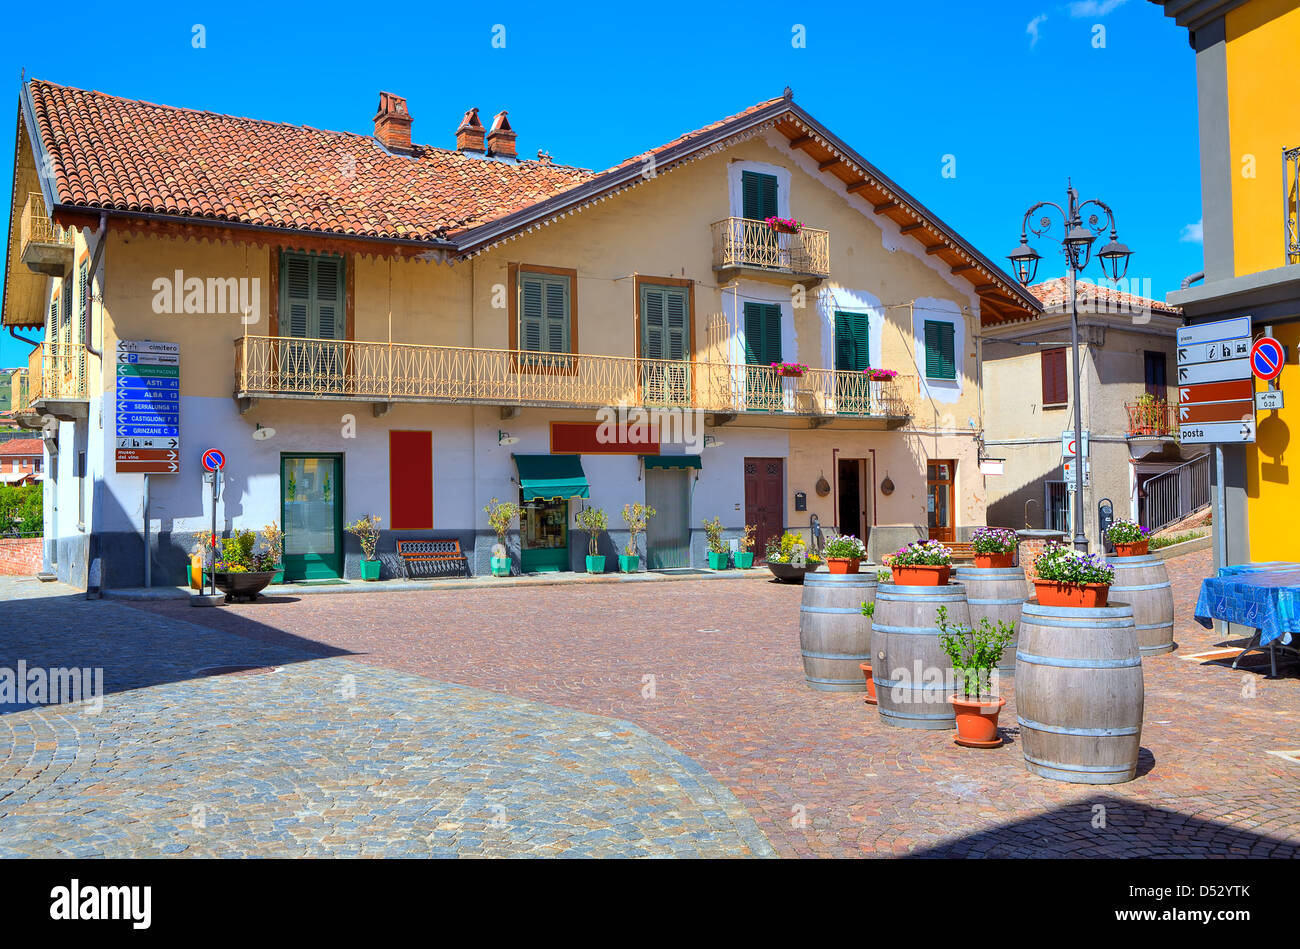 View of small cobblestone plaza at the center of typical italian town among colorful houses in Barolo, Italy. Stock Photo